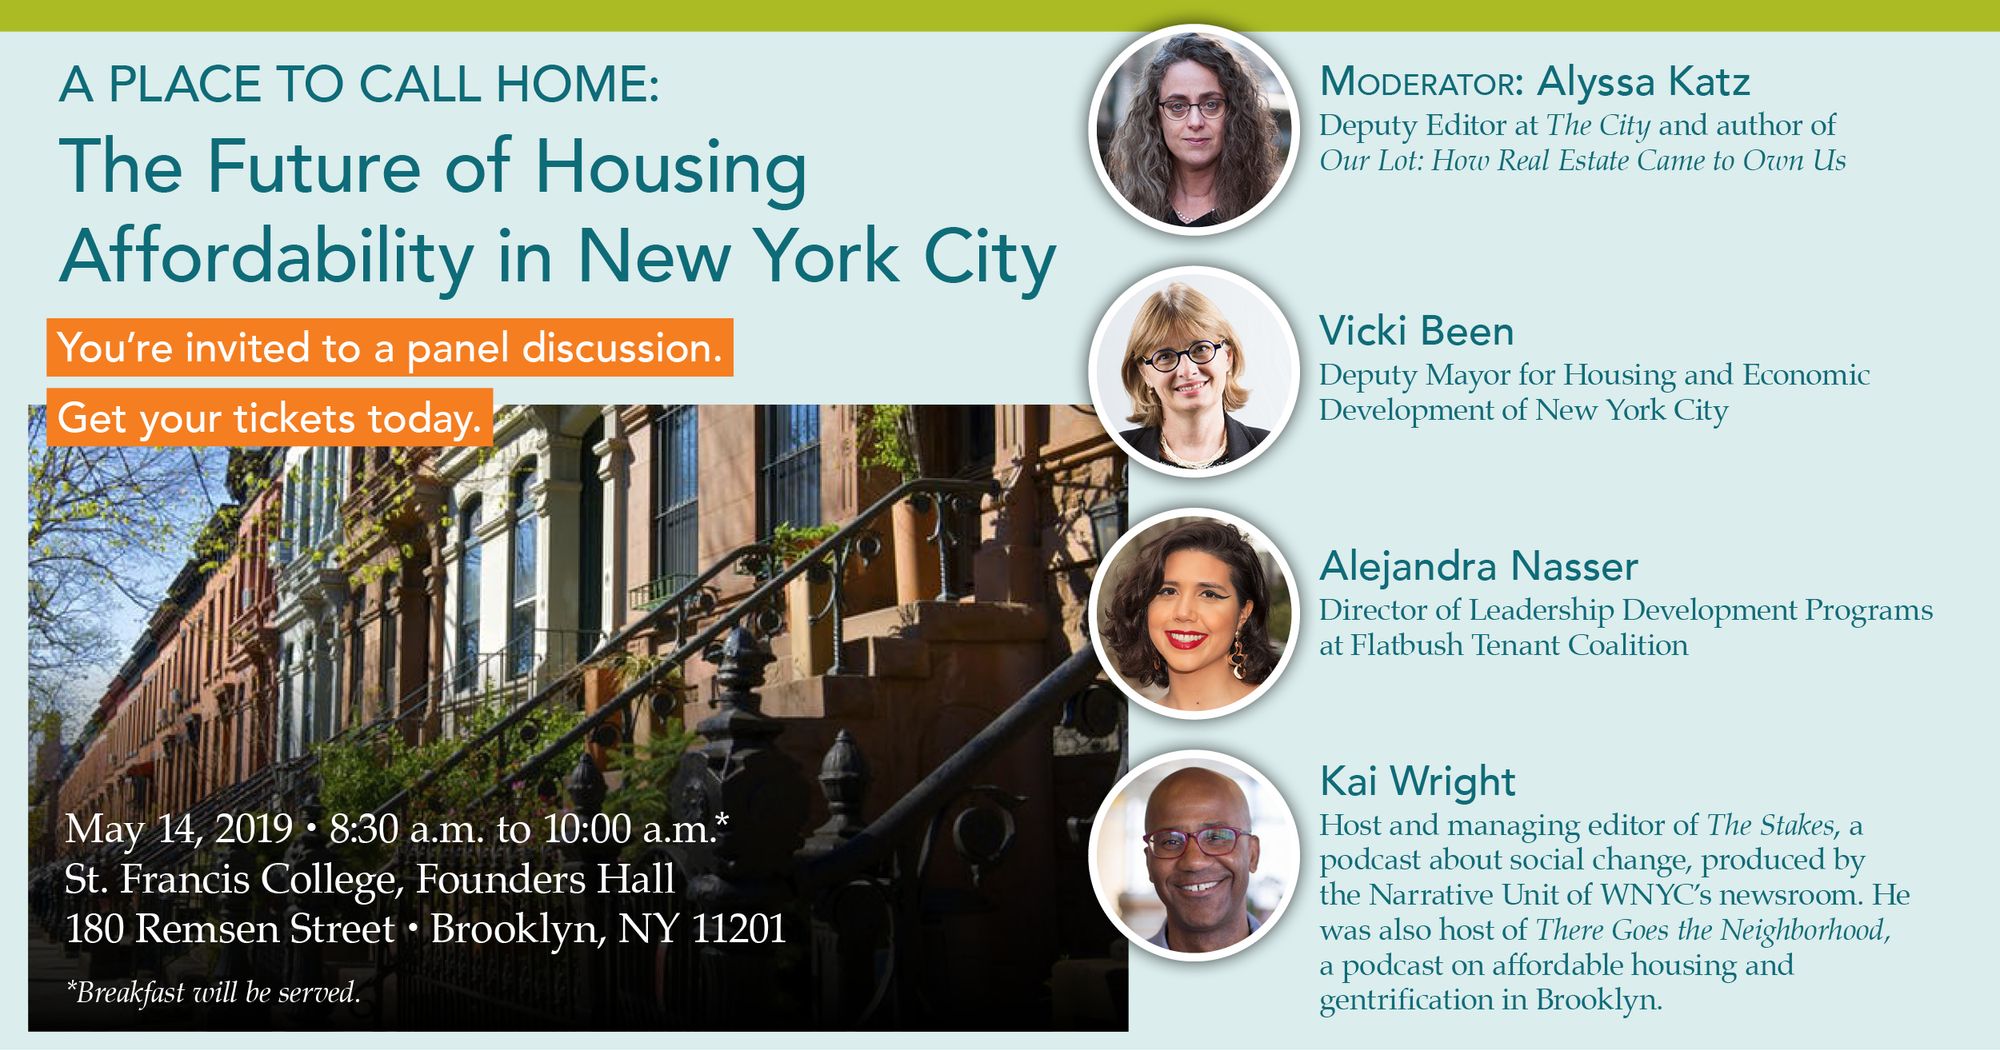 The Future of Housing Affordability in New York City